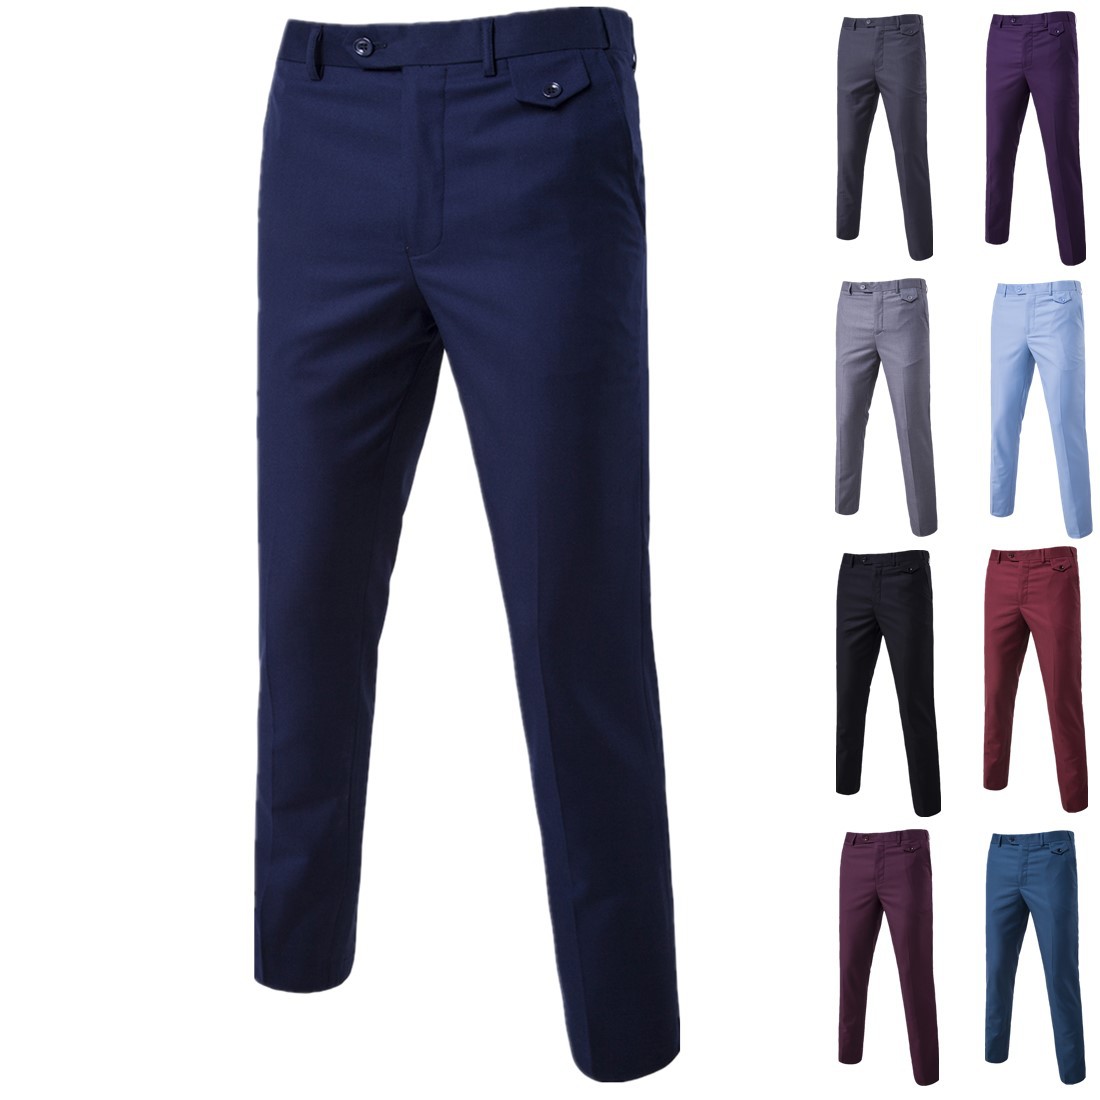 Men's casual dress pants spring and autumn fashion business wear trousers male professional slimming trend small straight trousers male